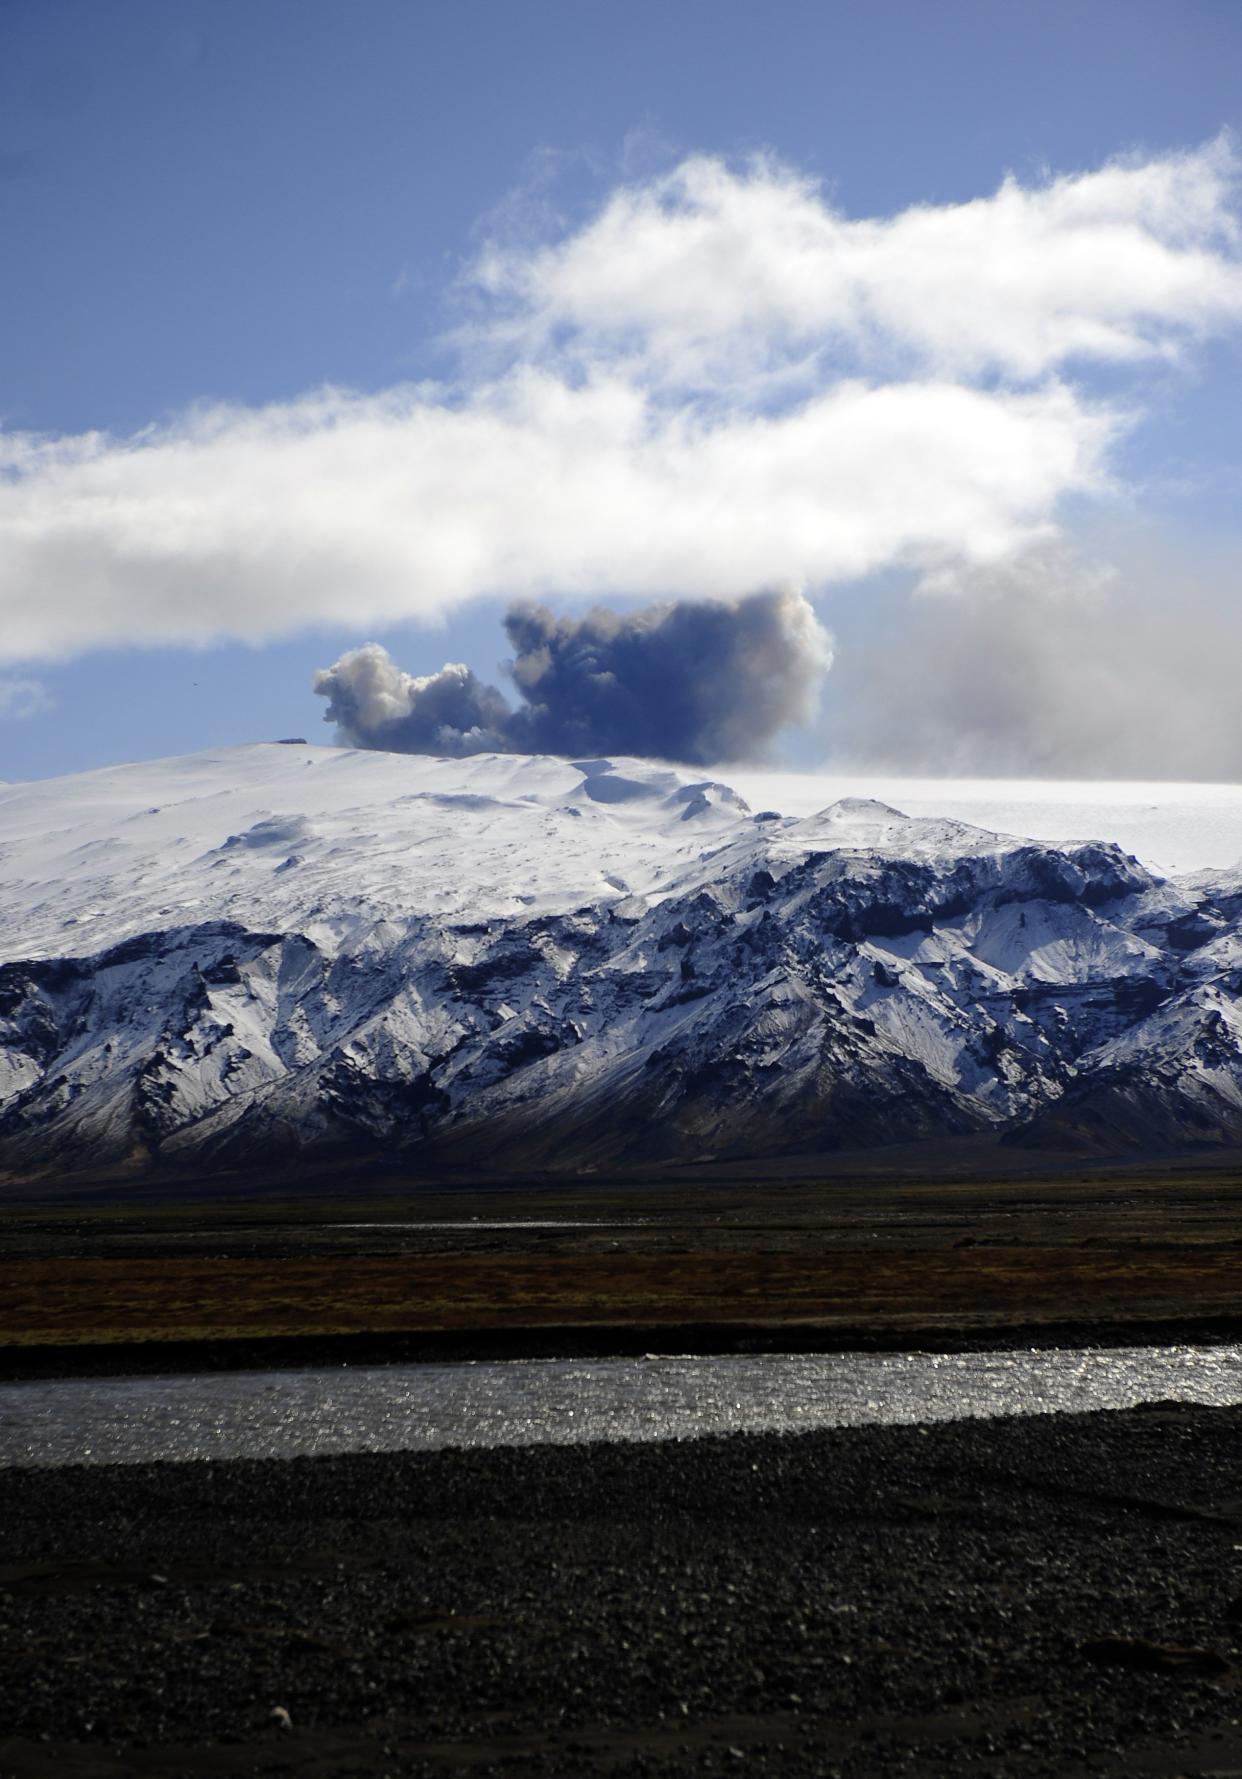 Smoke and ash billow from the Eyjafjallajokull volcano seen from Porolfsell on April 21, 2010 (AFP/Getty Images)